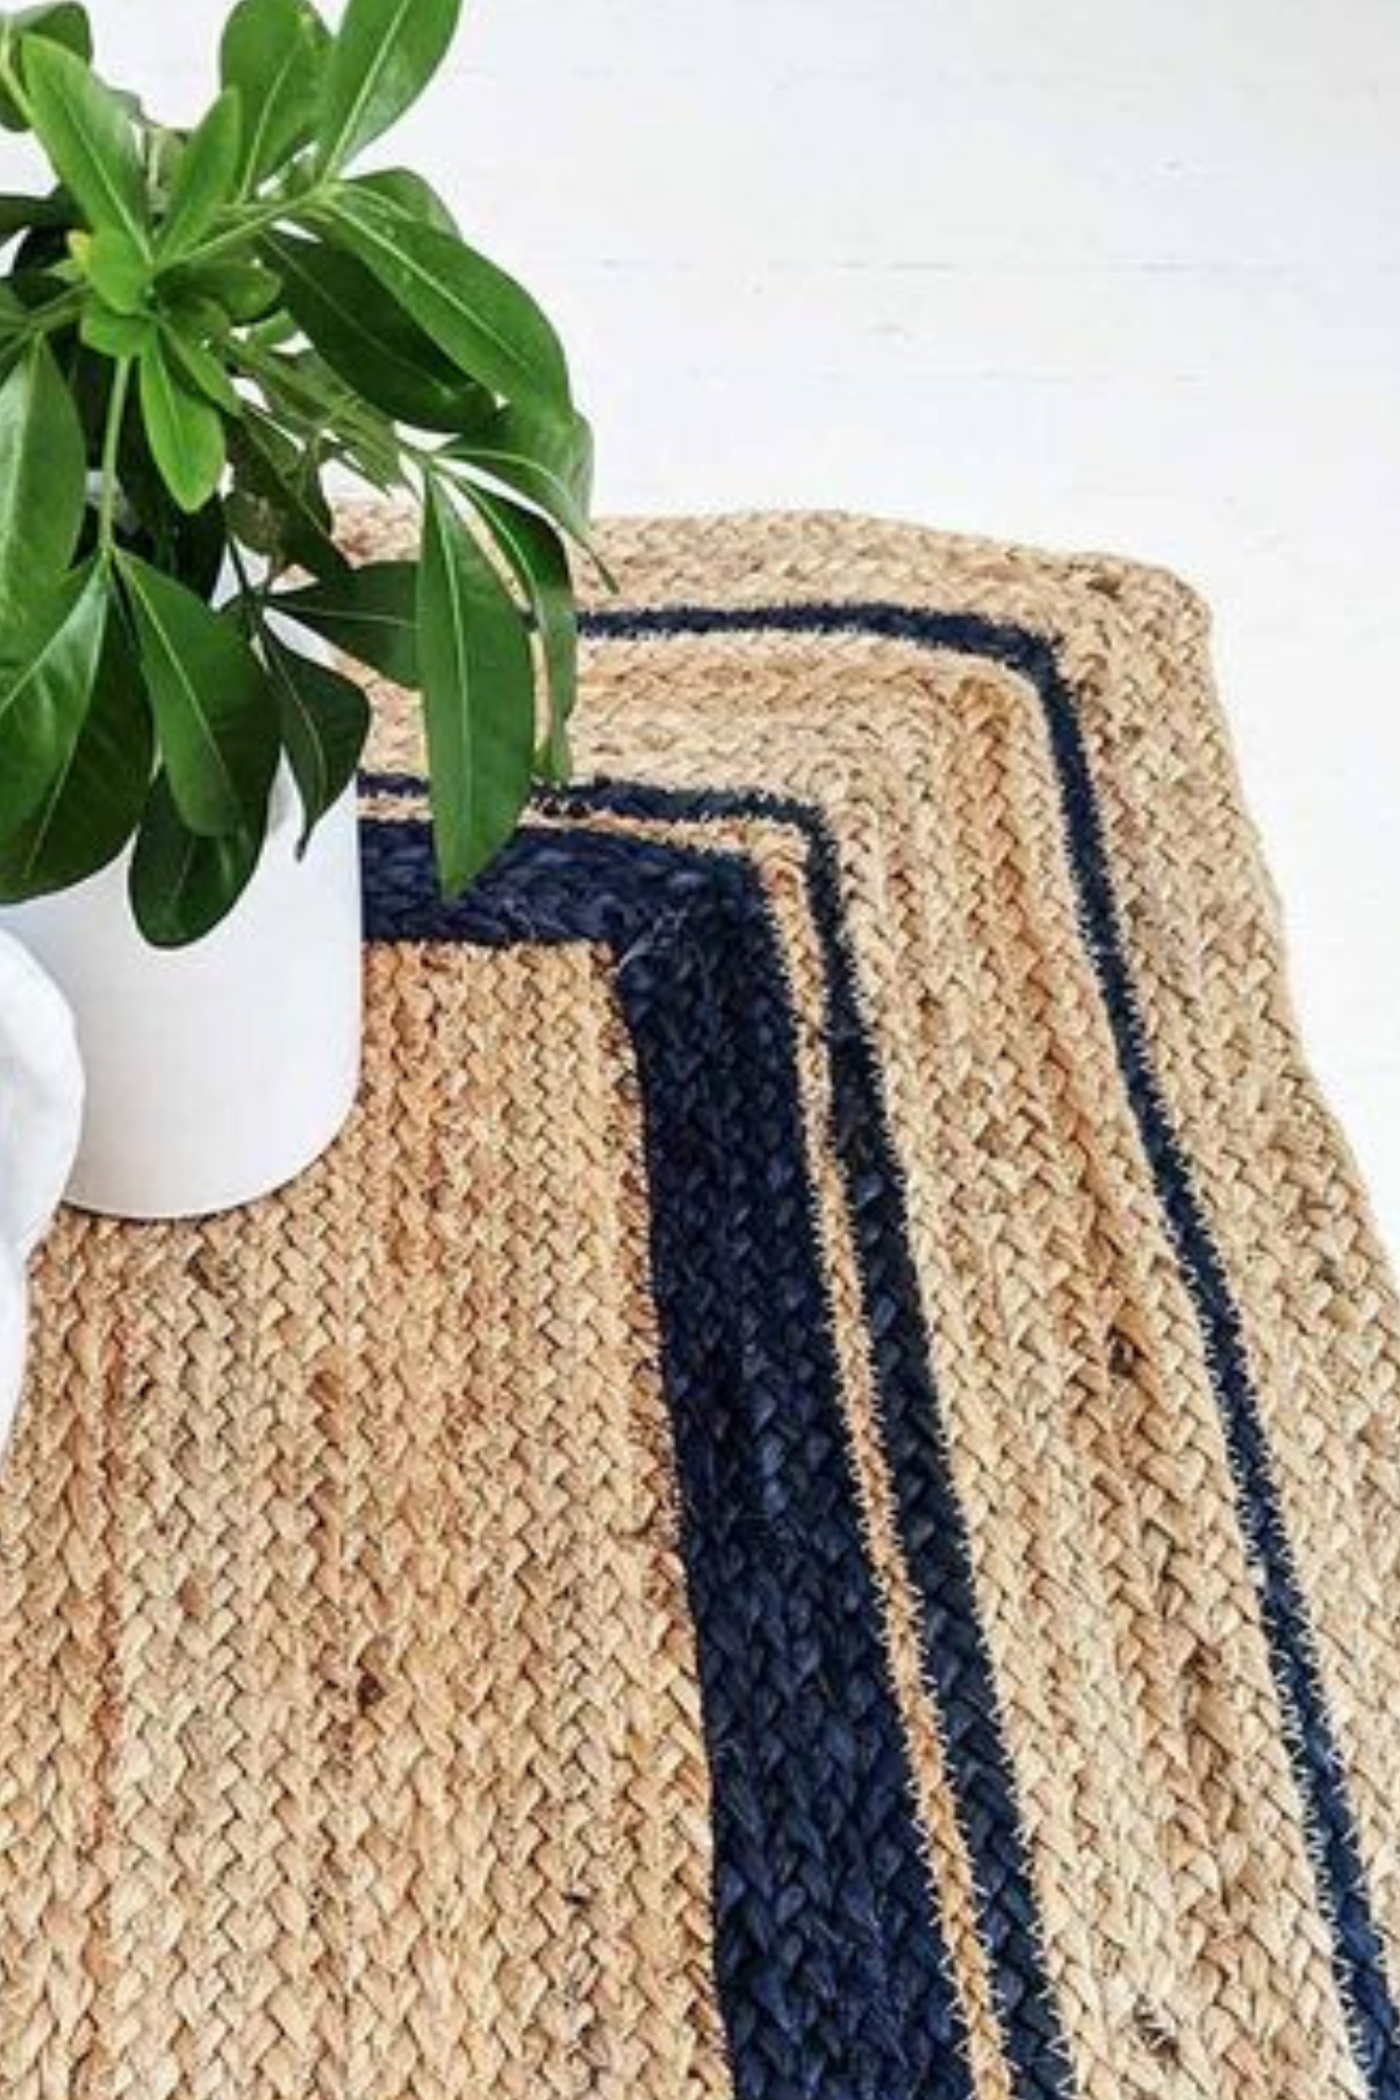 GOOD-FOR-THE-EARTH JUTE RUG